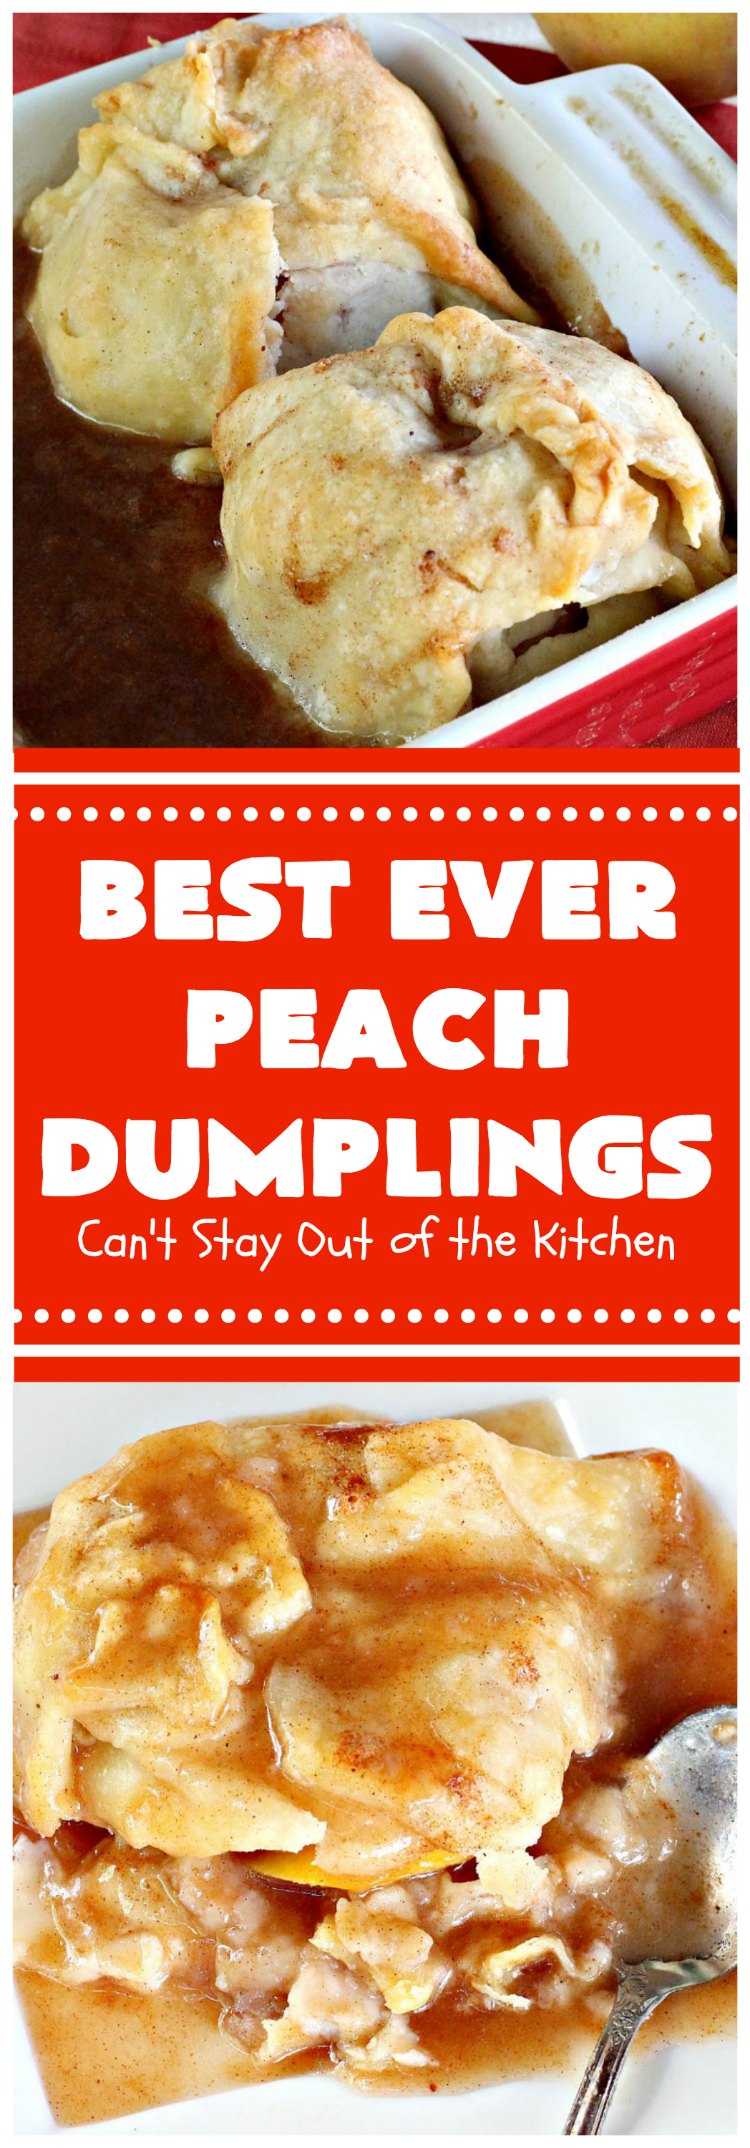 Peach Dumplings | Can't Stay Out of the Kitchen